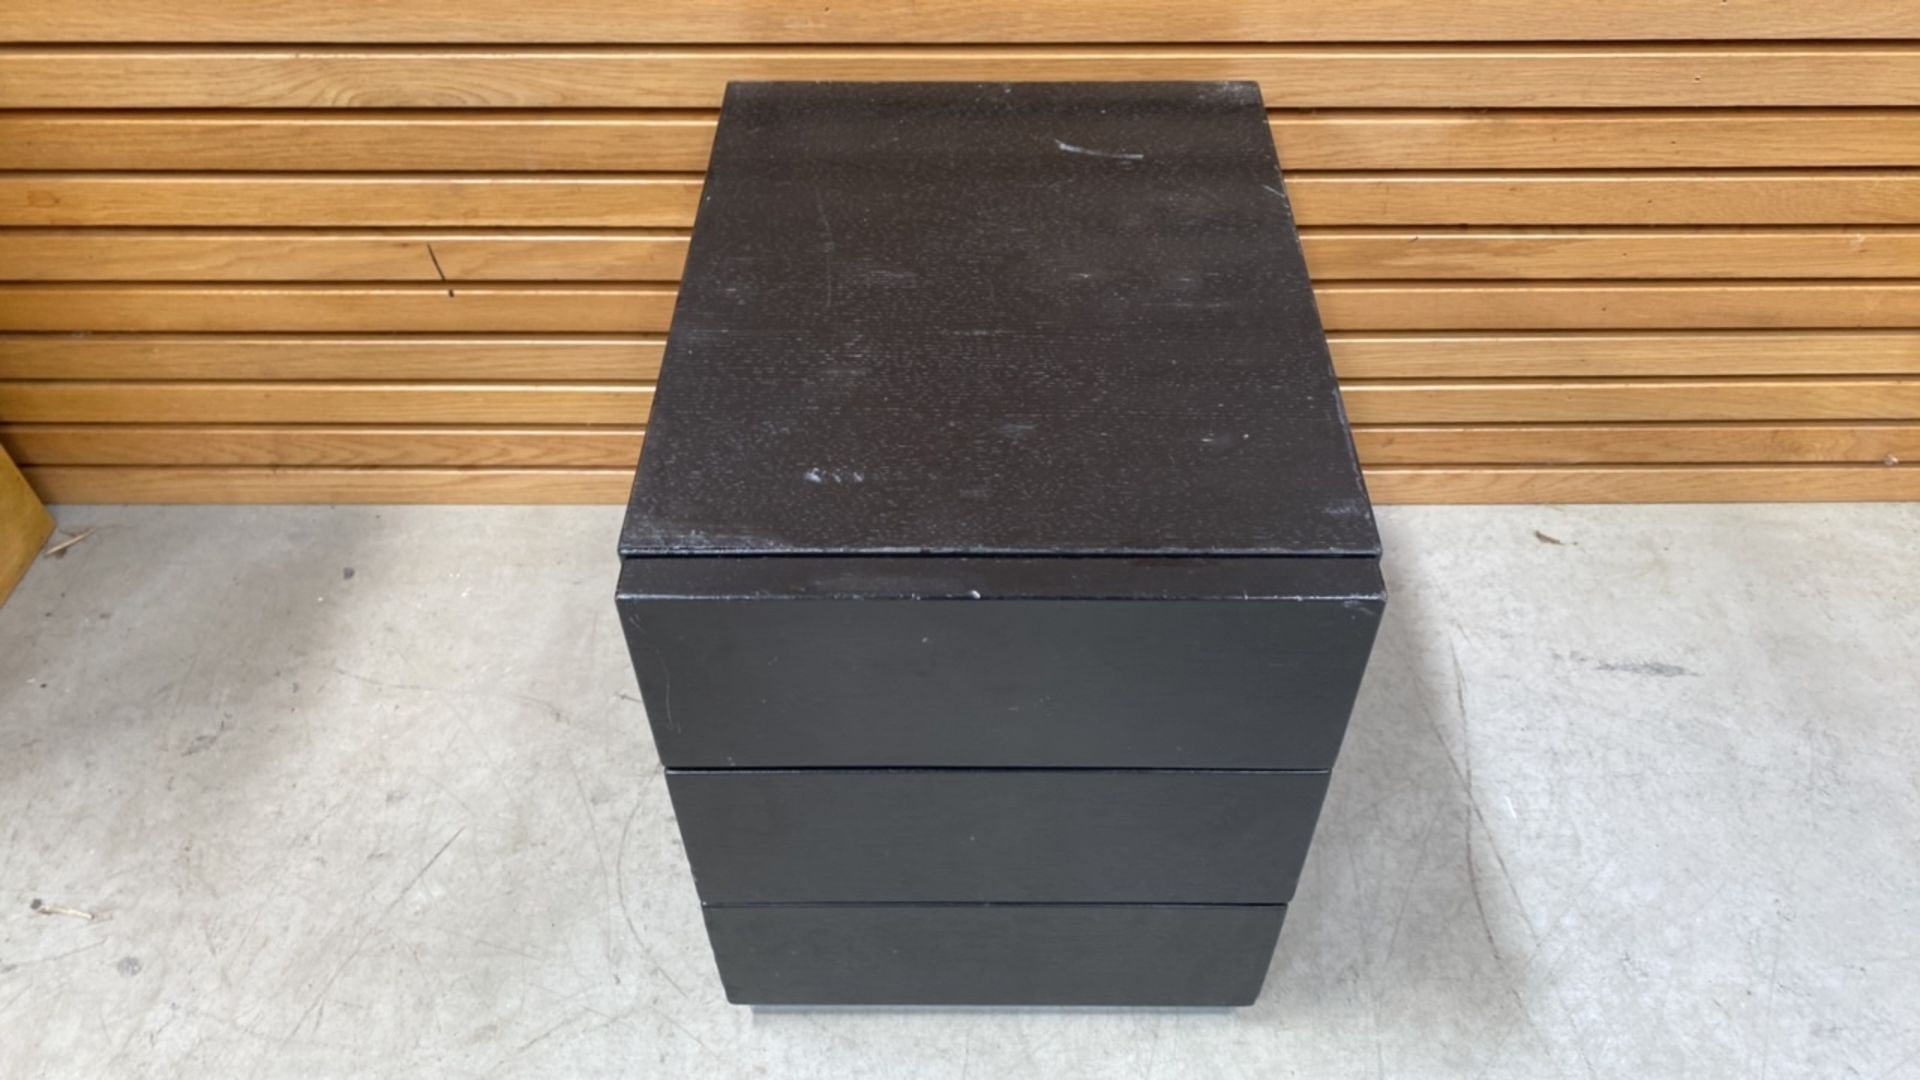 Black Wooden Side Table With 2 Draws - Image 2 of 3